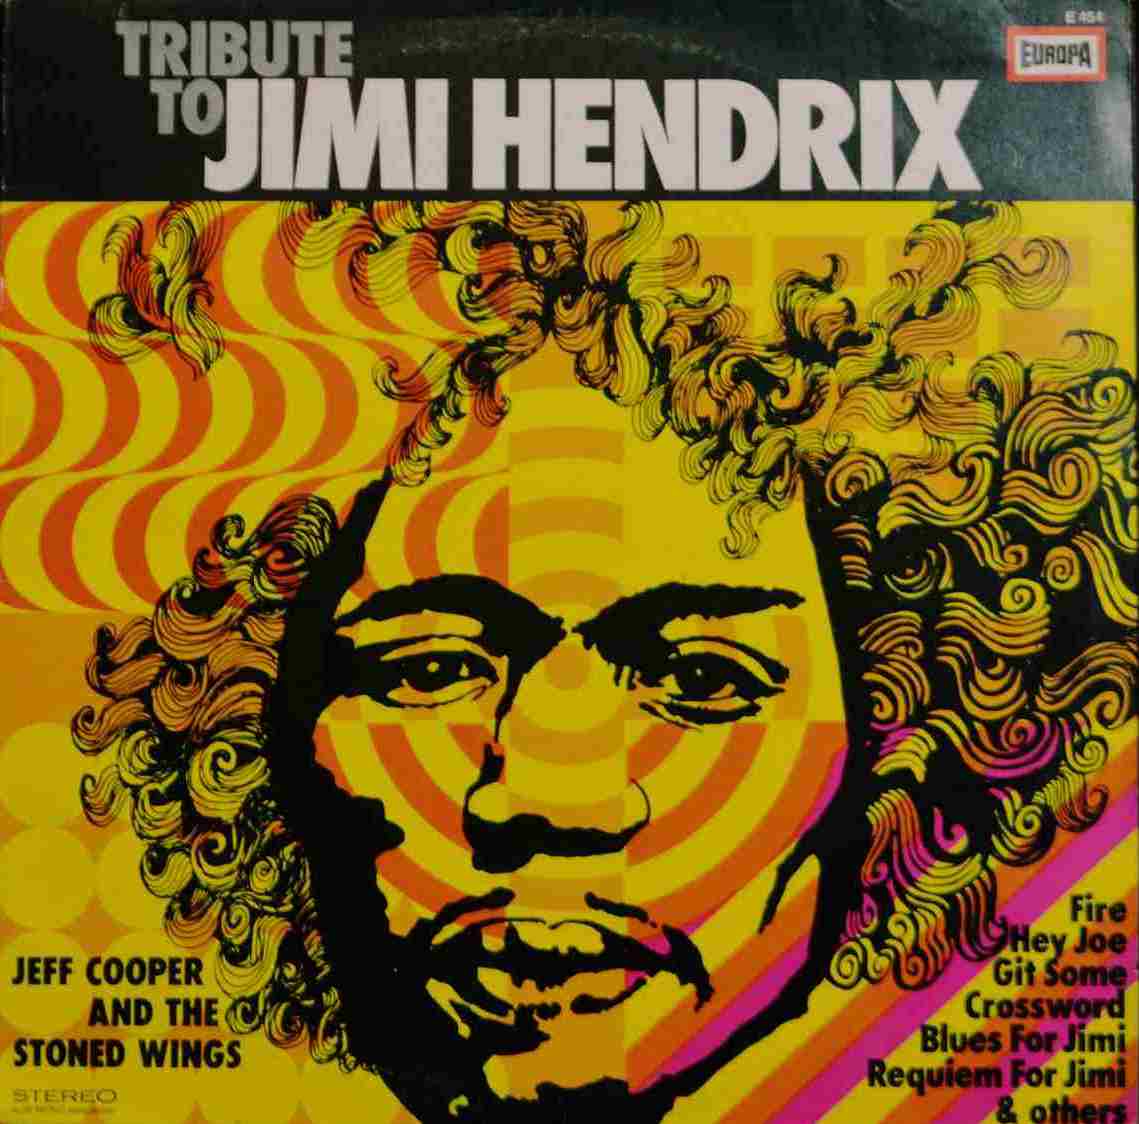 Jeff_Cooper_and_the_Stoned_Wings_-_Tribute_to_Jimi_Hendrix_.jpg